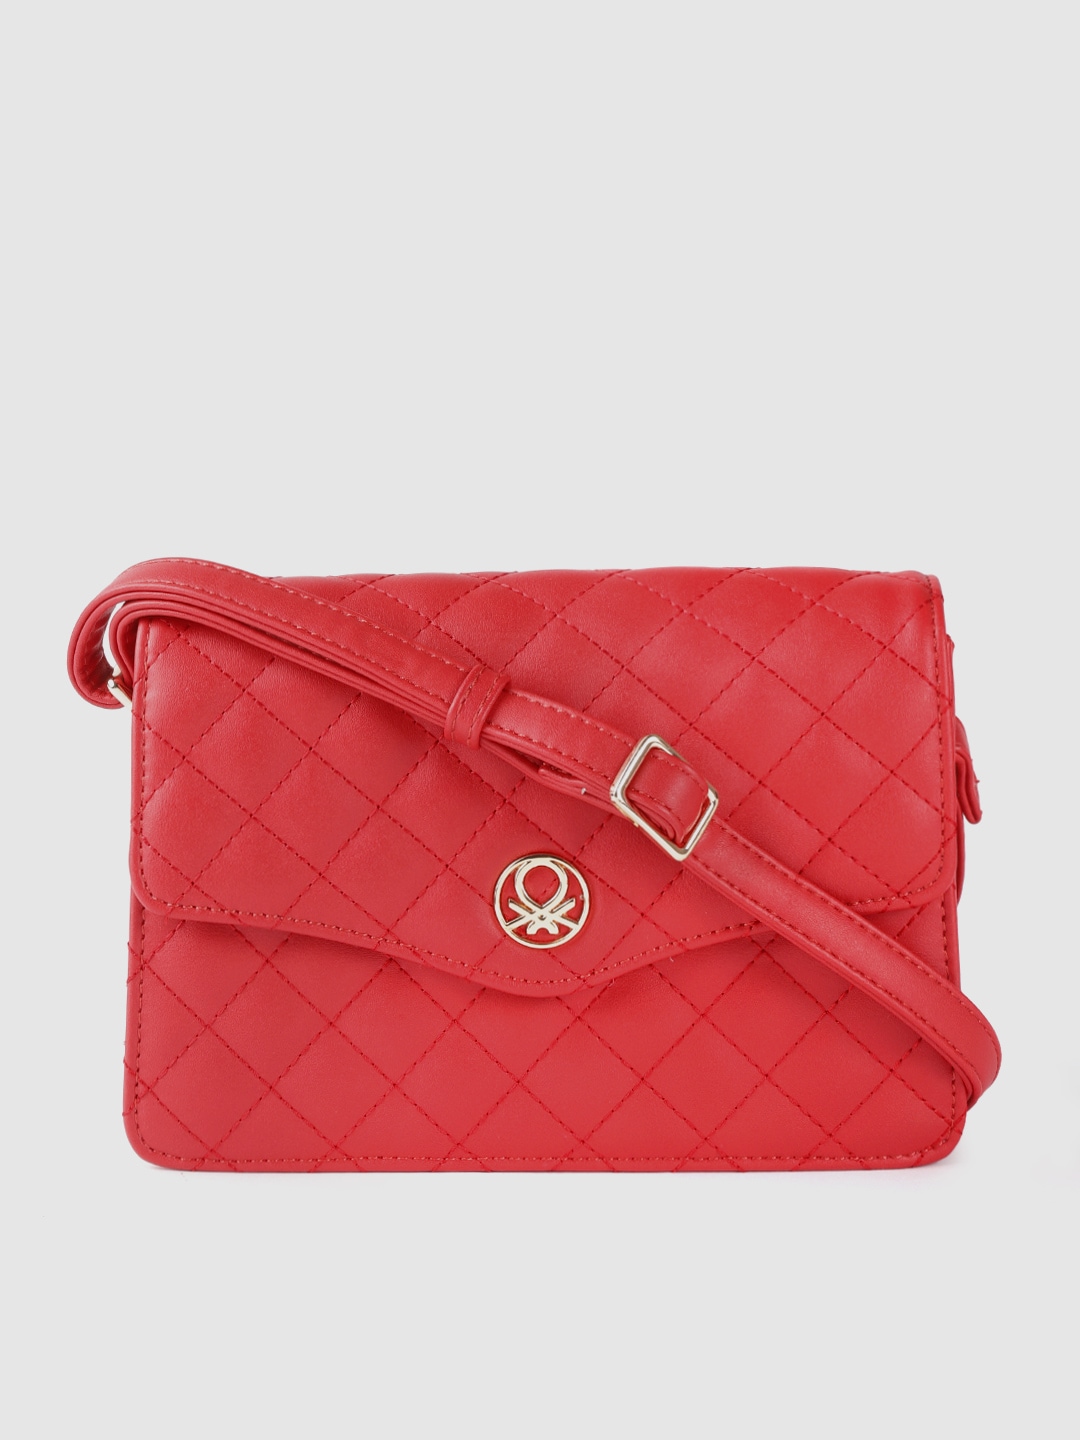 United Colors of Benetton Red Quilted Structured Sling Bag Price in India